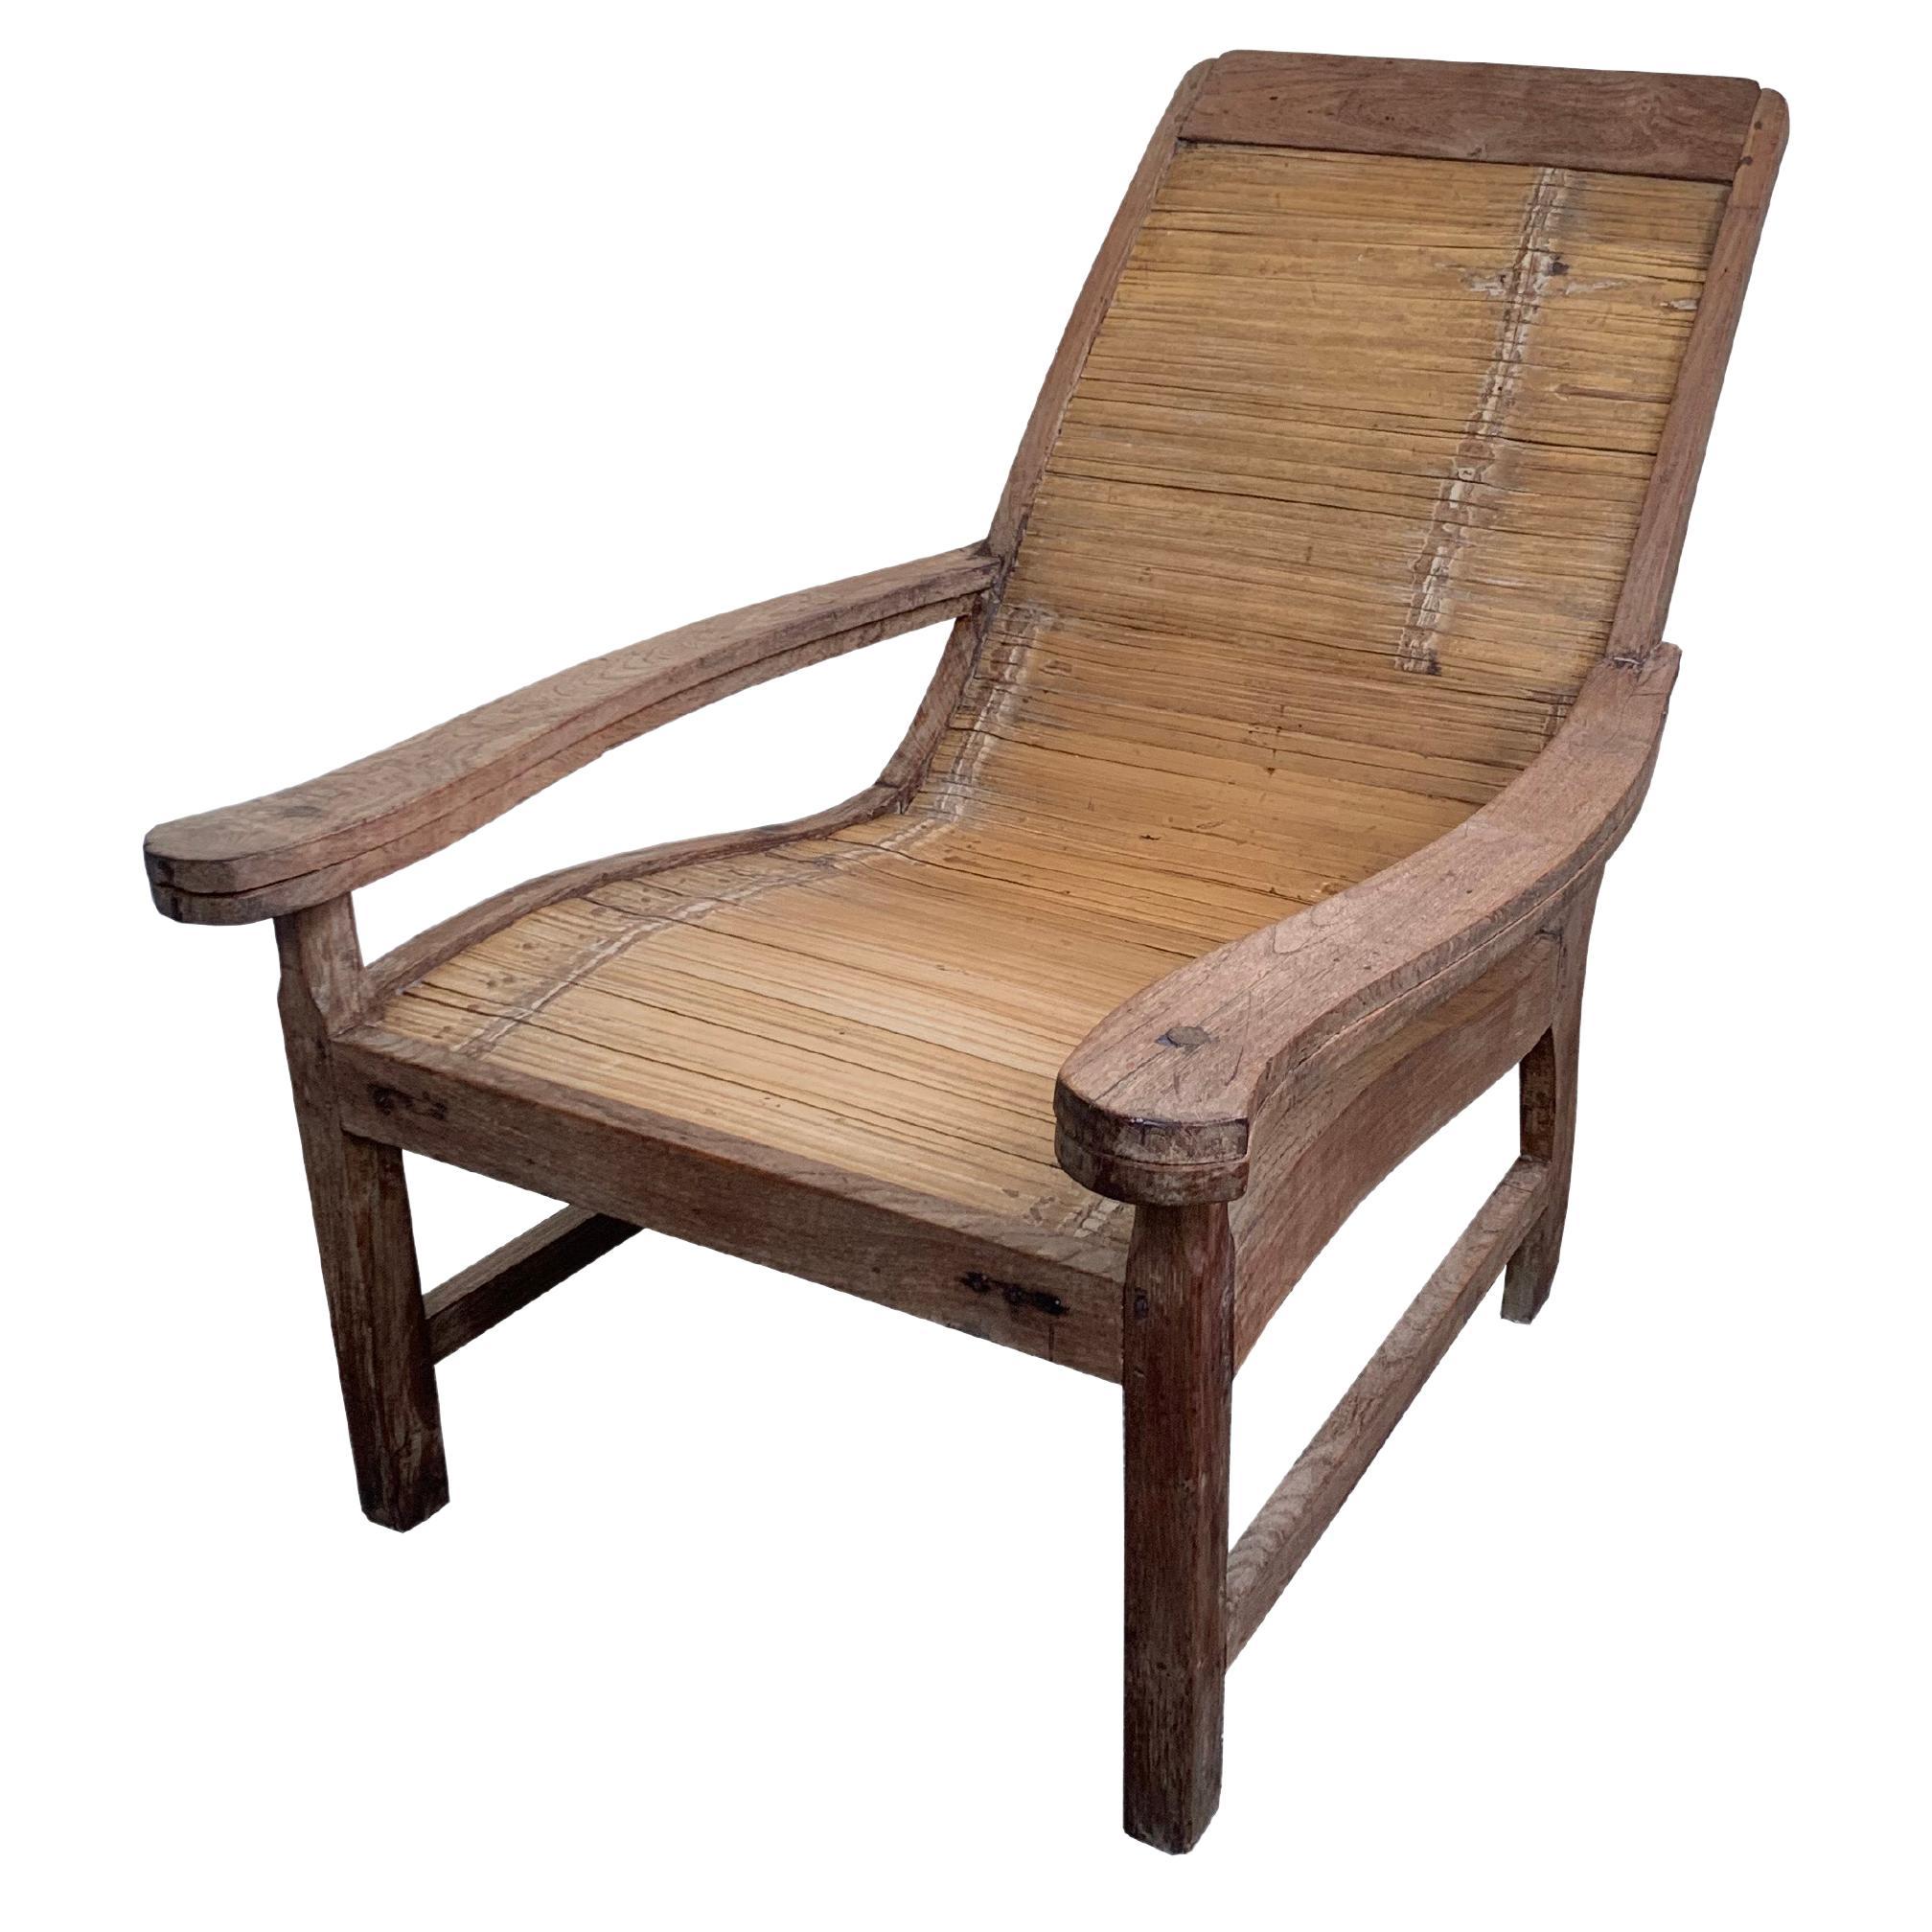 Colonial Solid Teak & Bamboo Plantation Chair with Leg Rests, Java, Indonesia